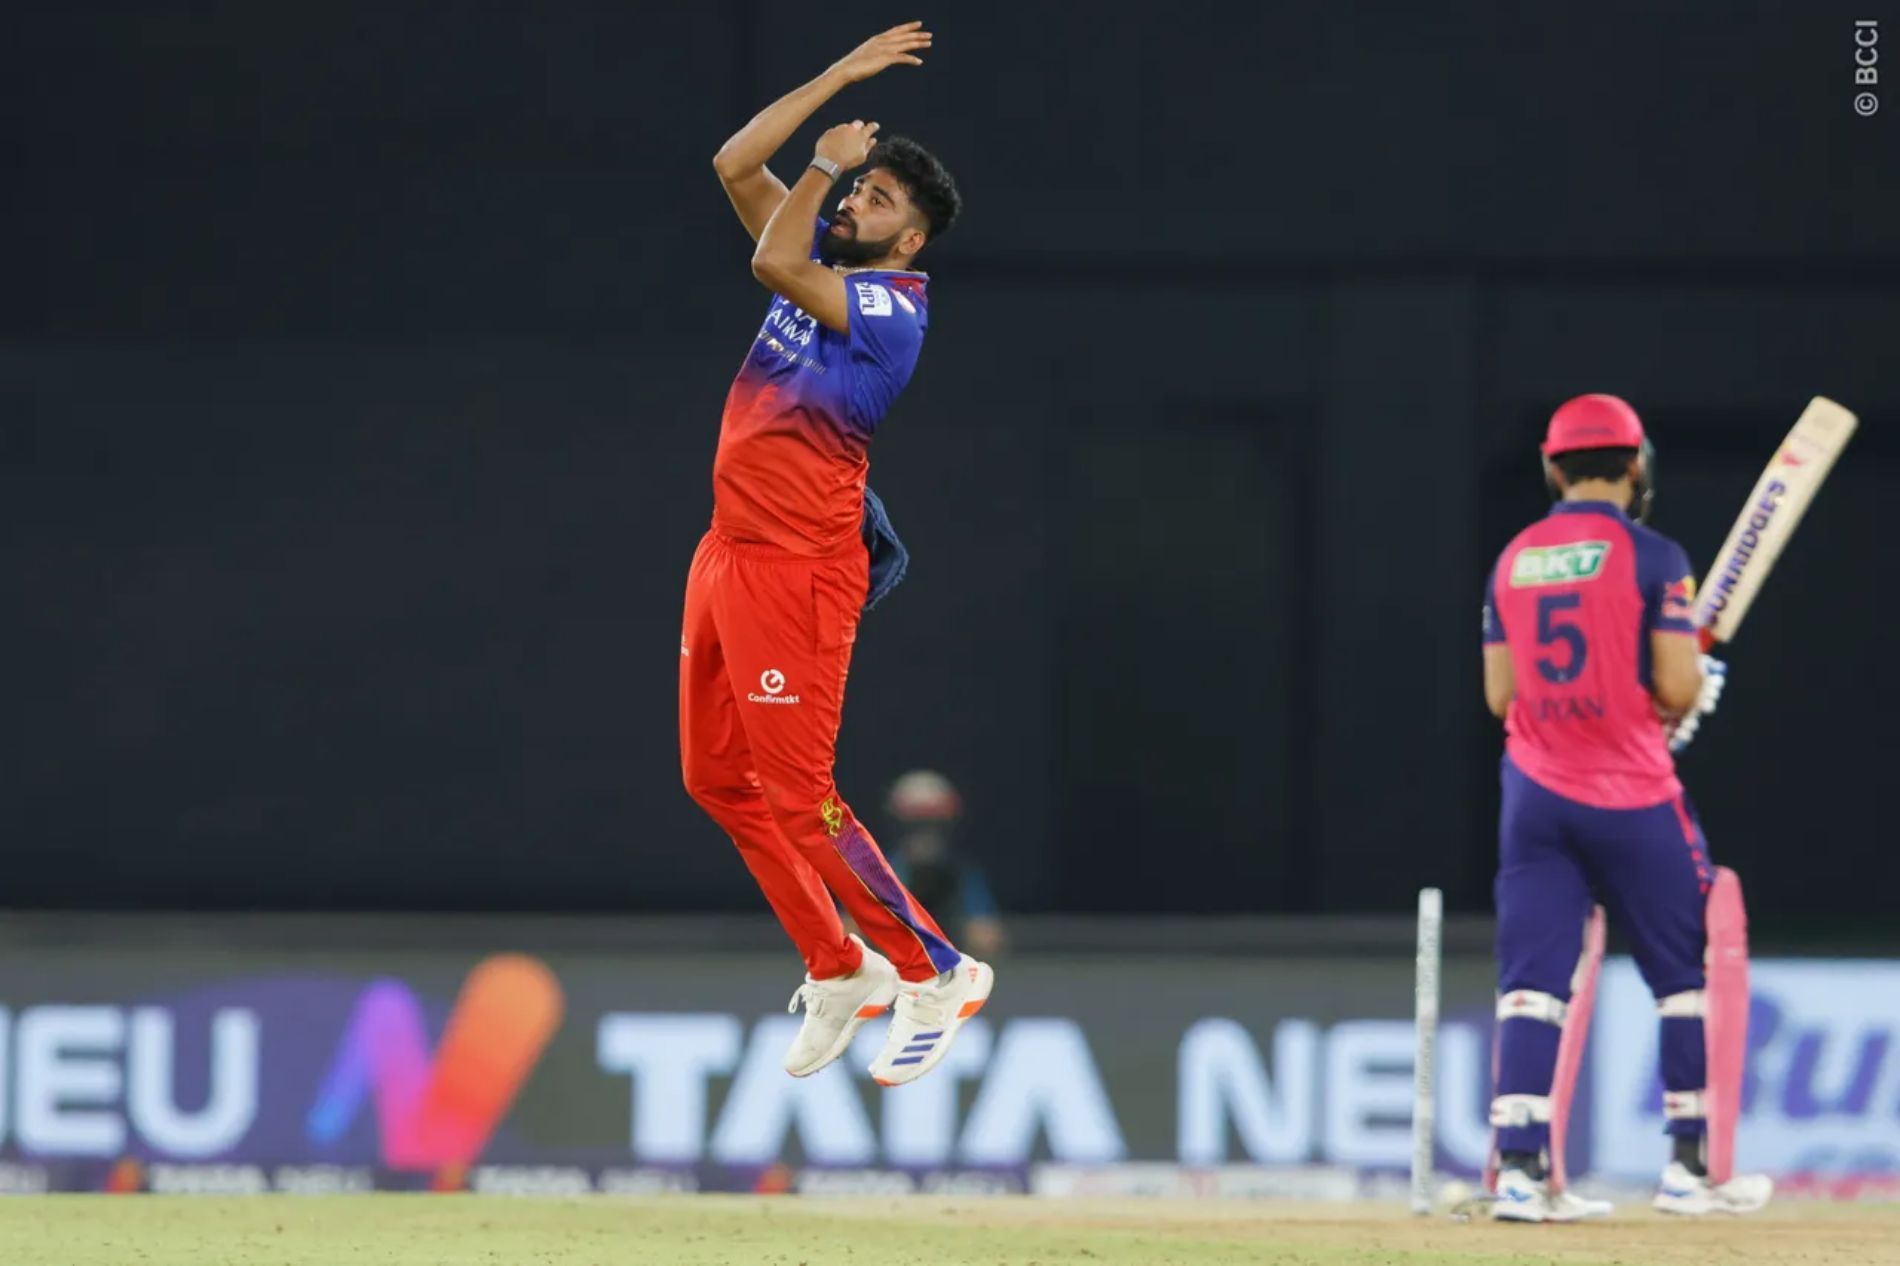 Mohammed Siraj&rsquo;s twin strikes gave RCB hope late in the contest. (Image Credit: BCCI/ iplt20.com)